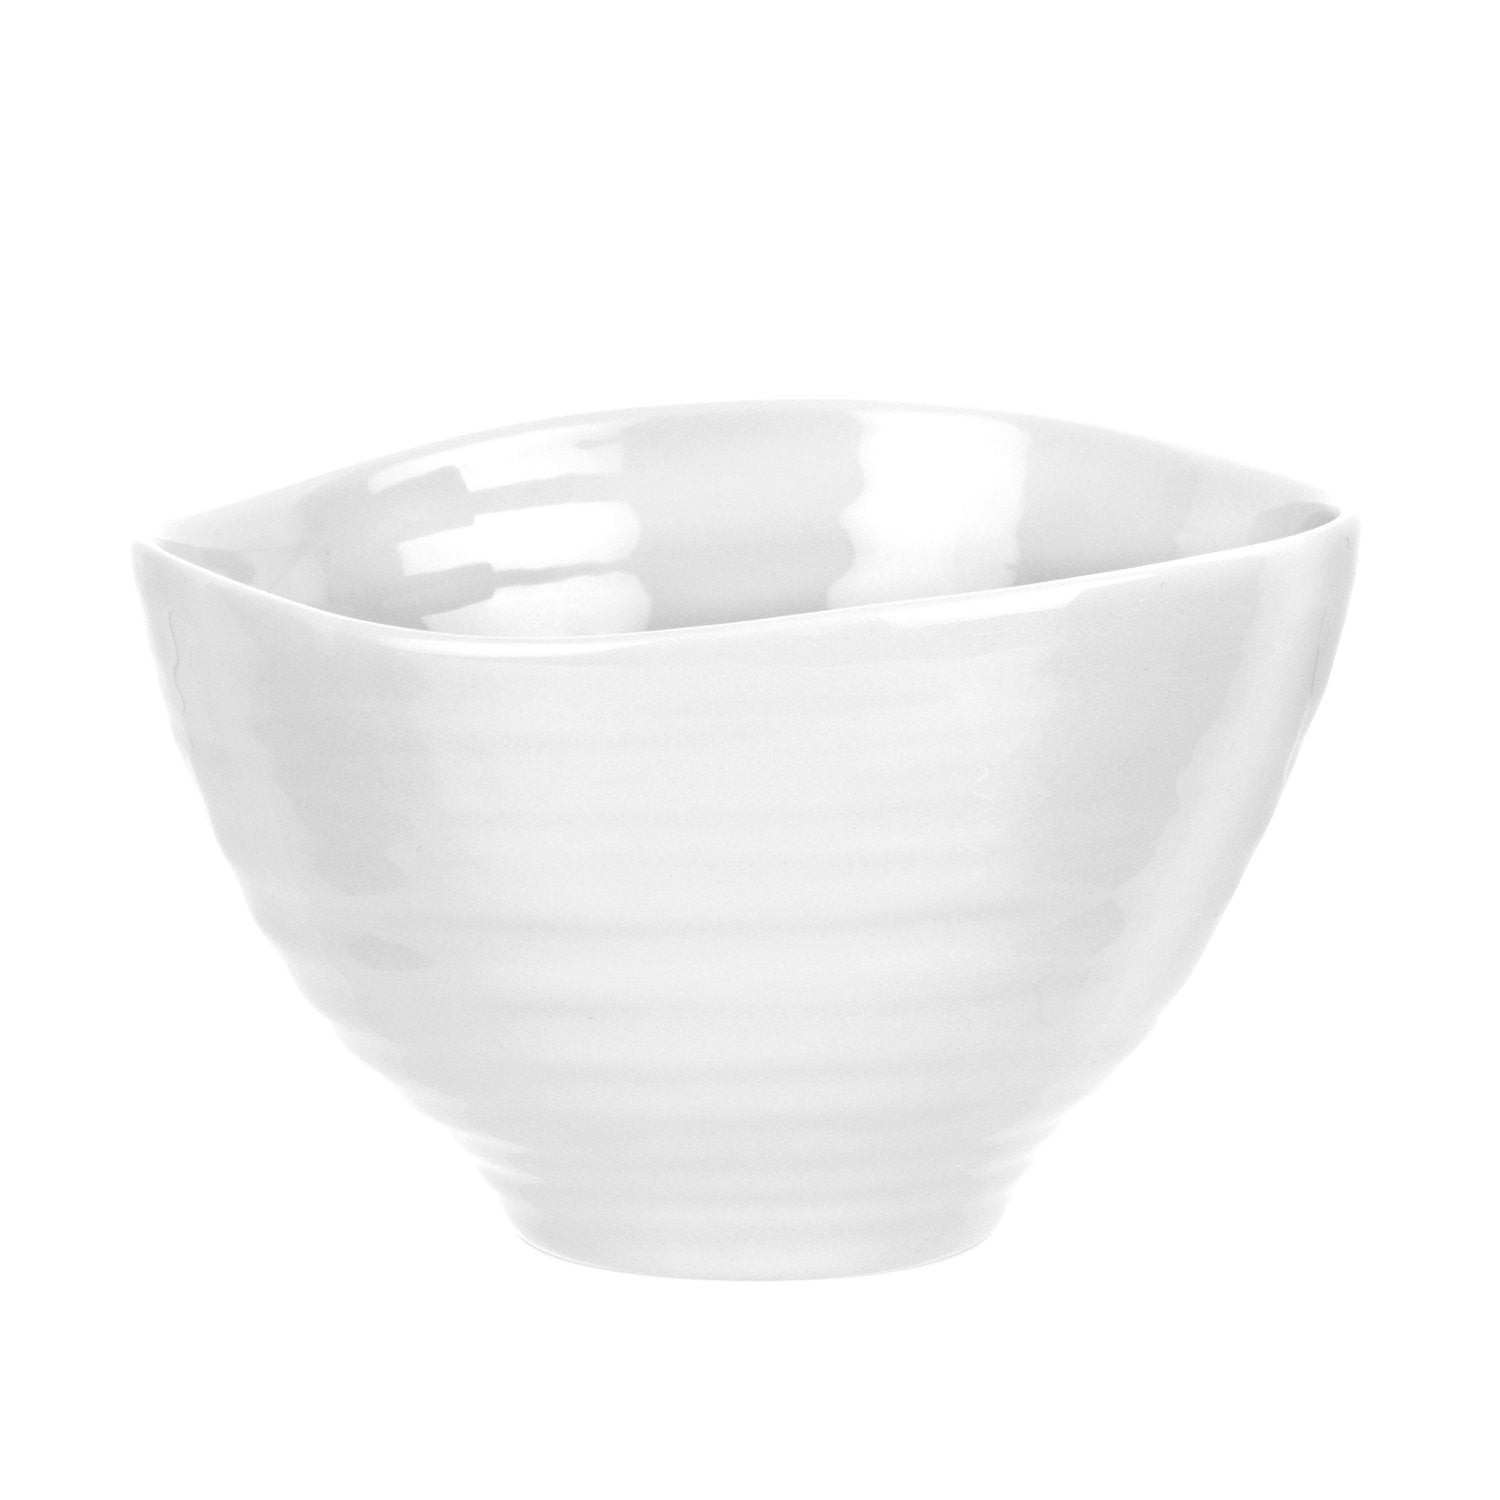 Sophie Conran White Sm Footed Bowl